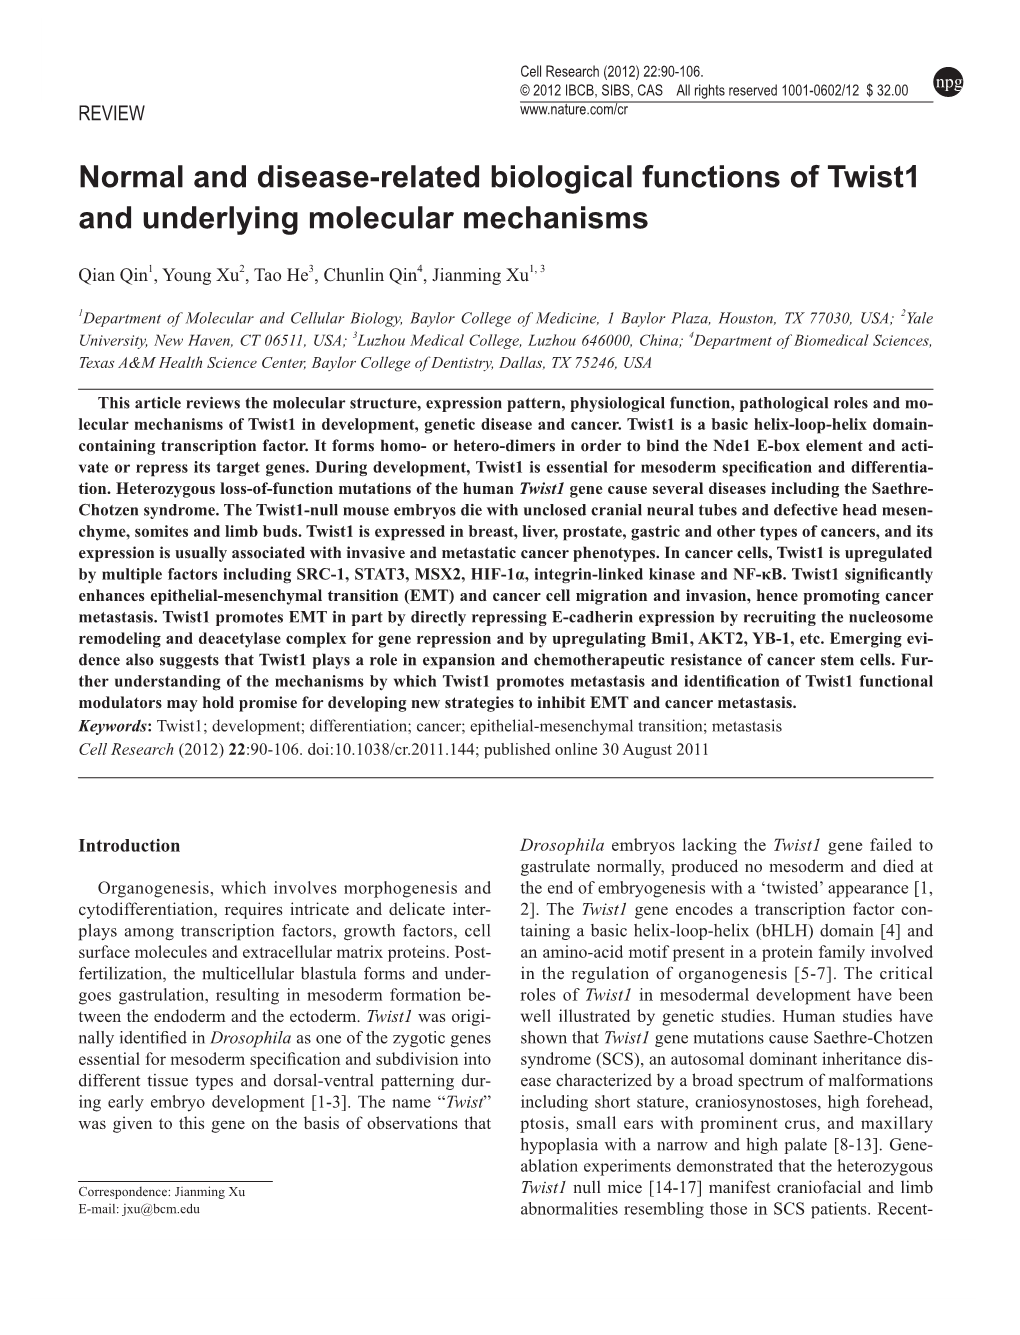 Normal and Disease-Related Biological Functions of Twist1 and Underlying Molecular Mechanisms